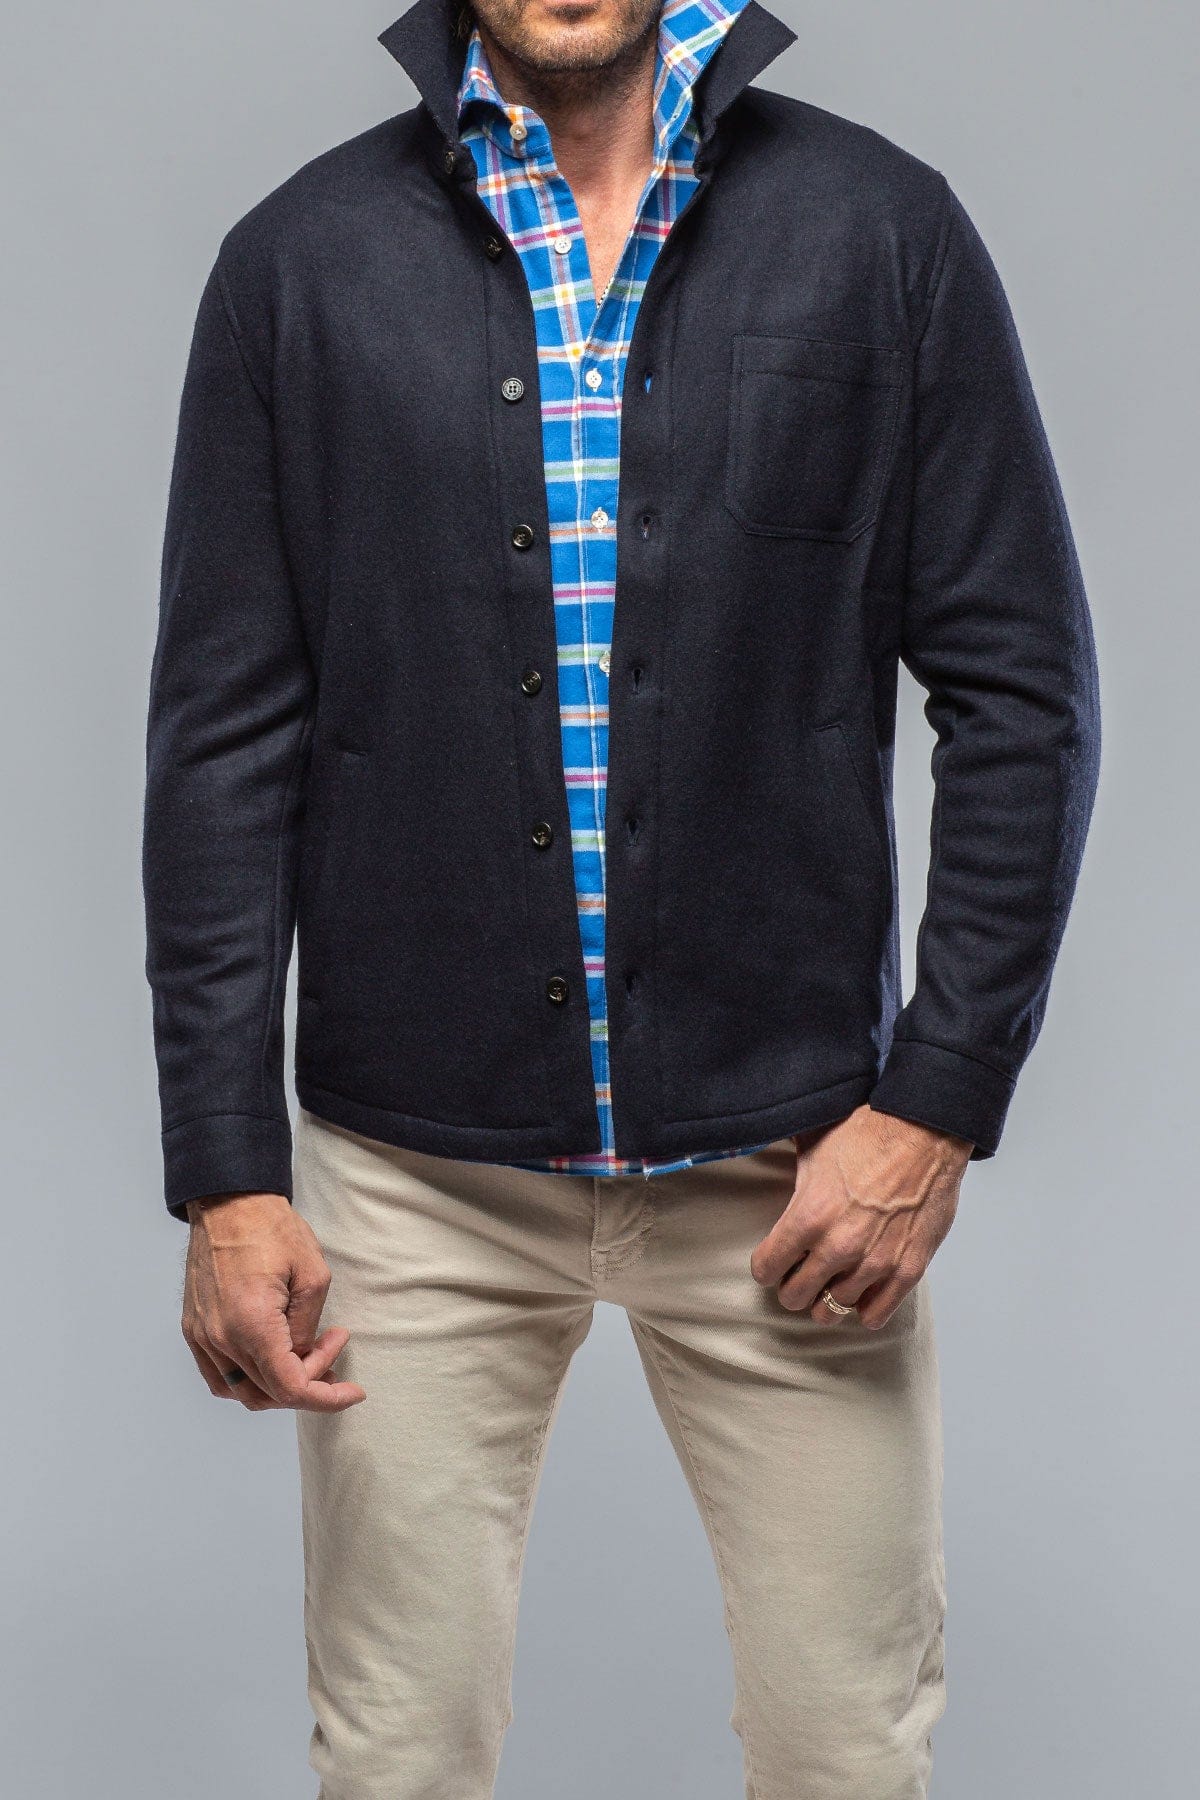 Sooter Cashmere Shirt In Navy - AXEL'S